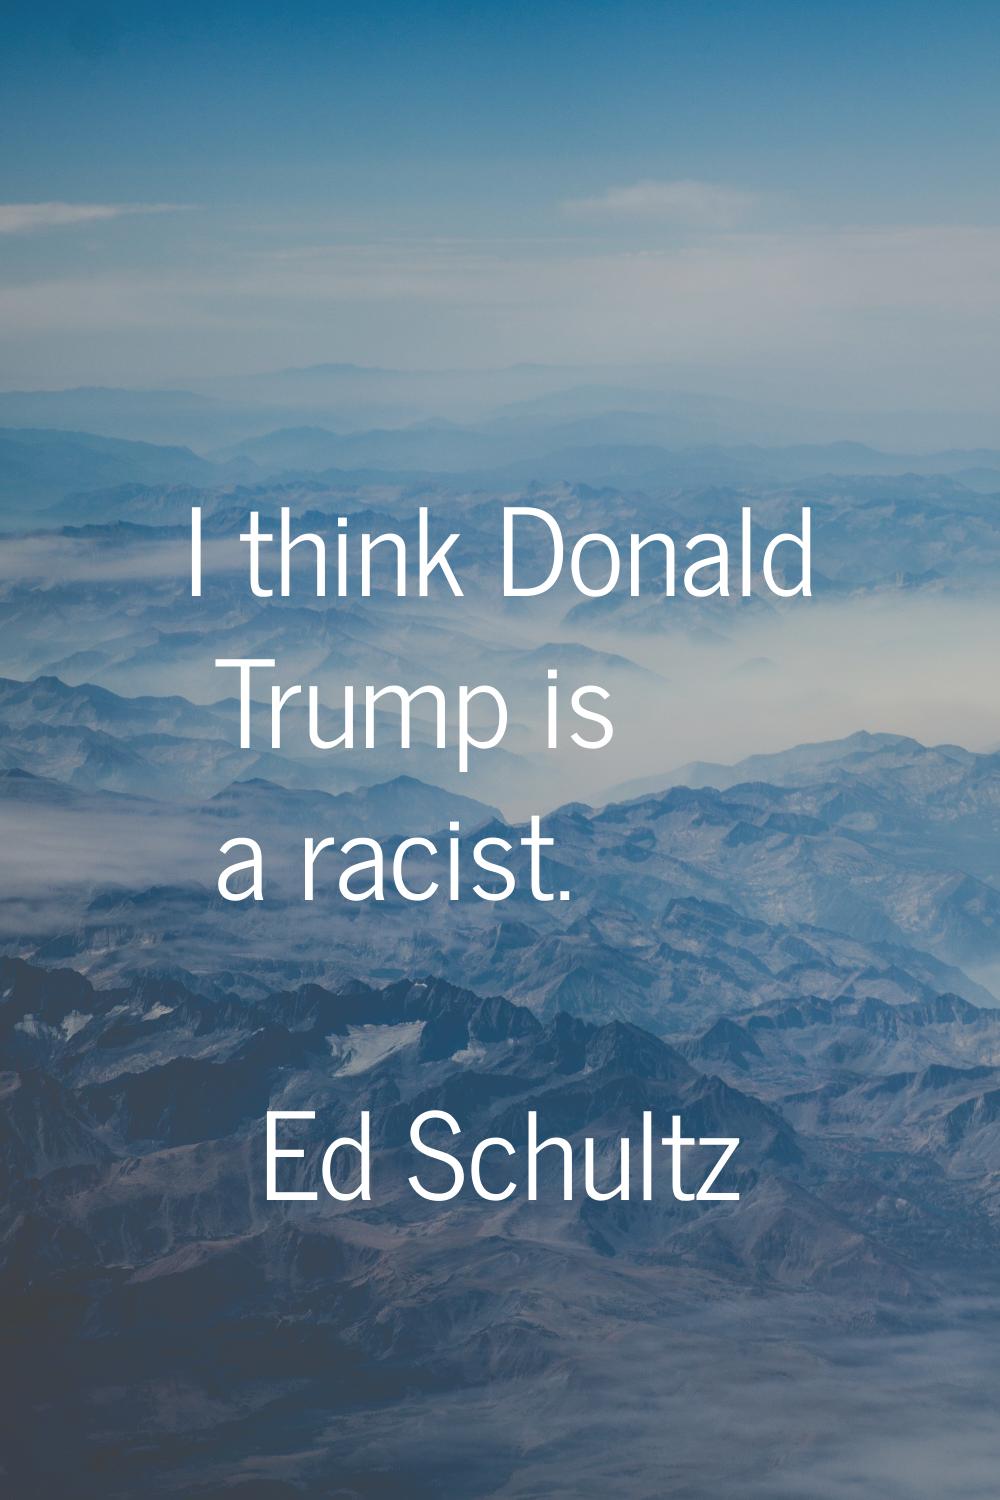 I think Donald Trump is a racist.